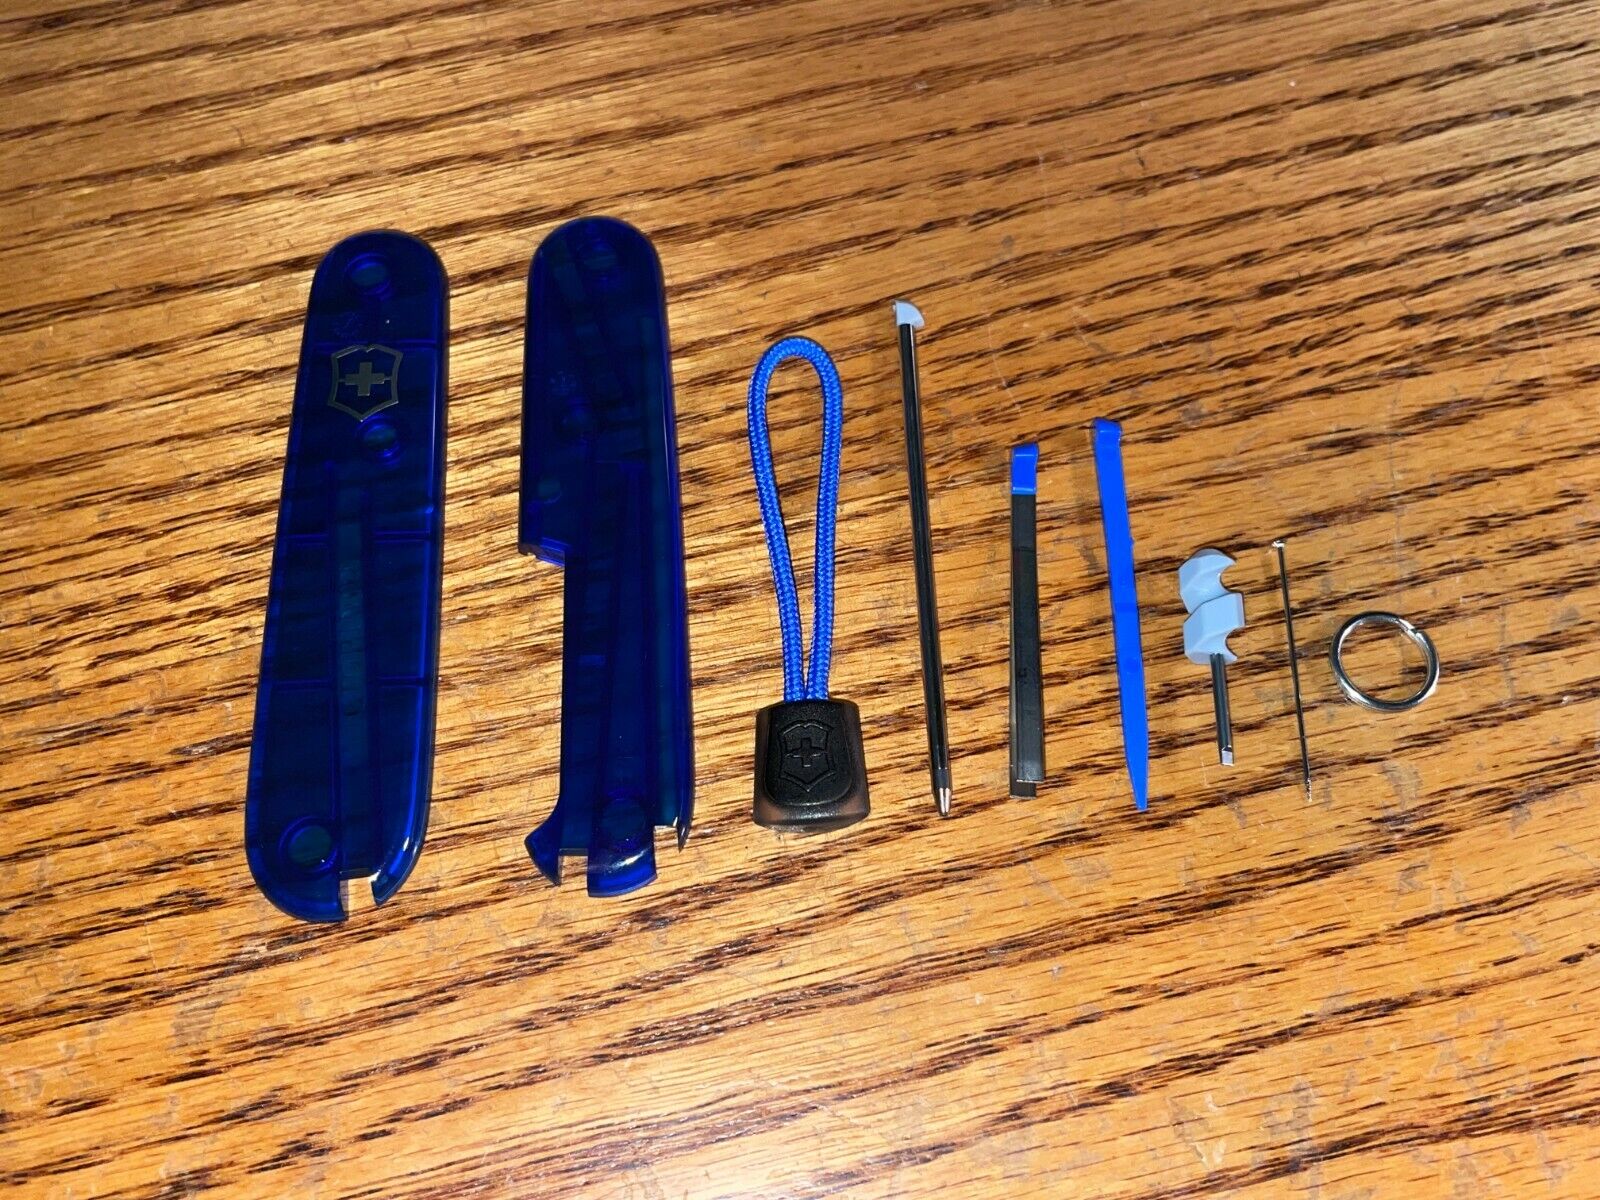 New Victorinox 91mm PLUS HANDLE / SCALE 9 Piece KIT in Trans Sapphire Blue